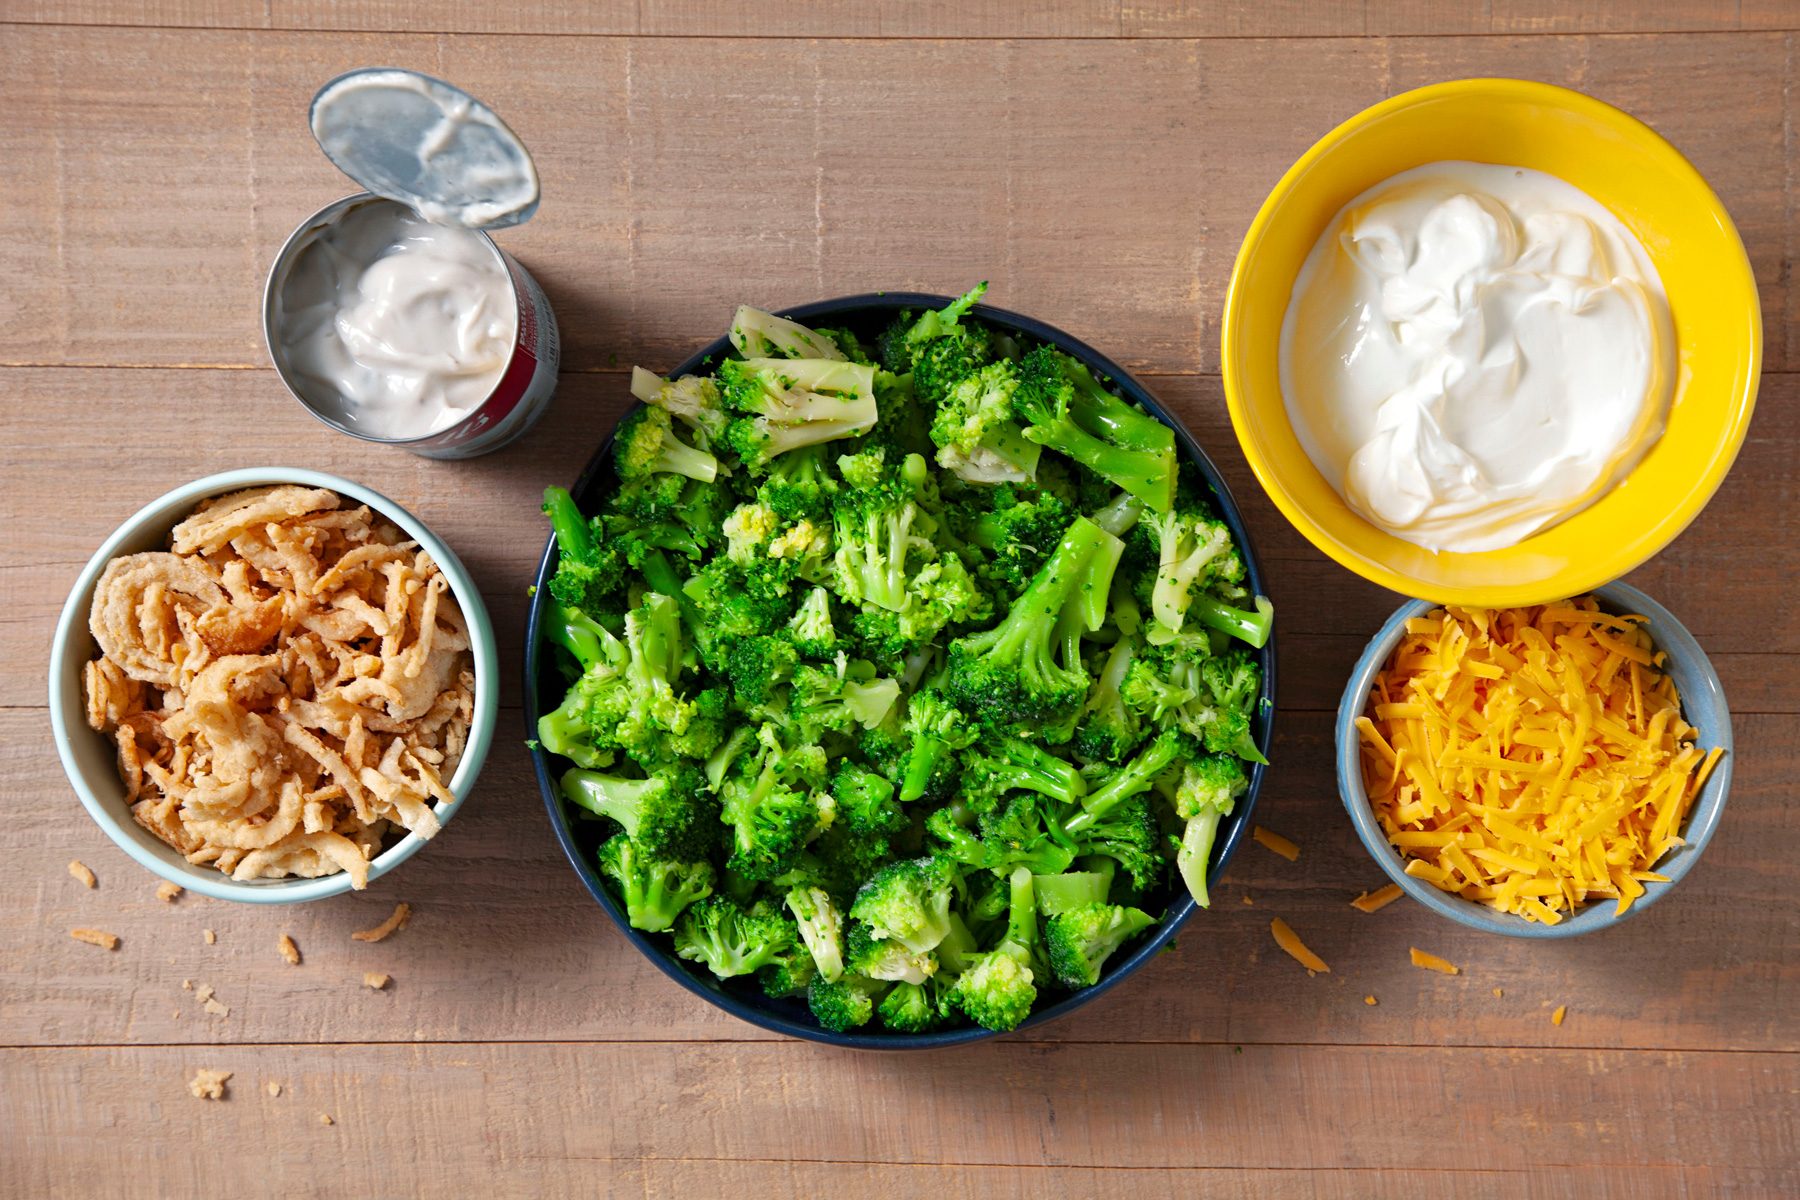 A bowl of broccoli, cheddar cheese and other ingredients